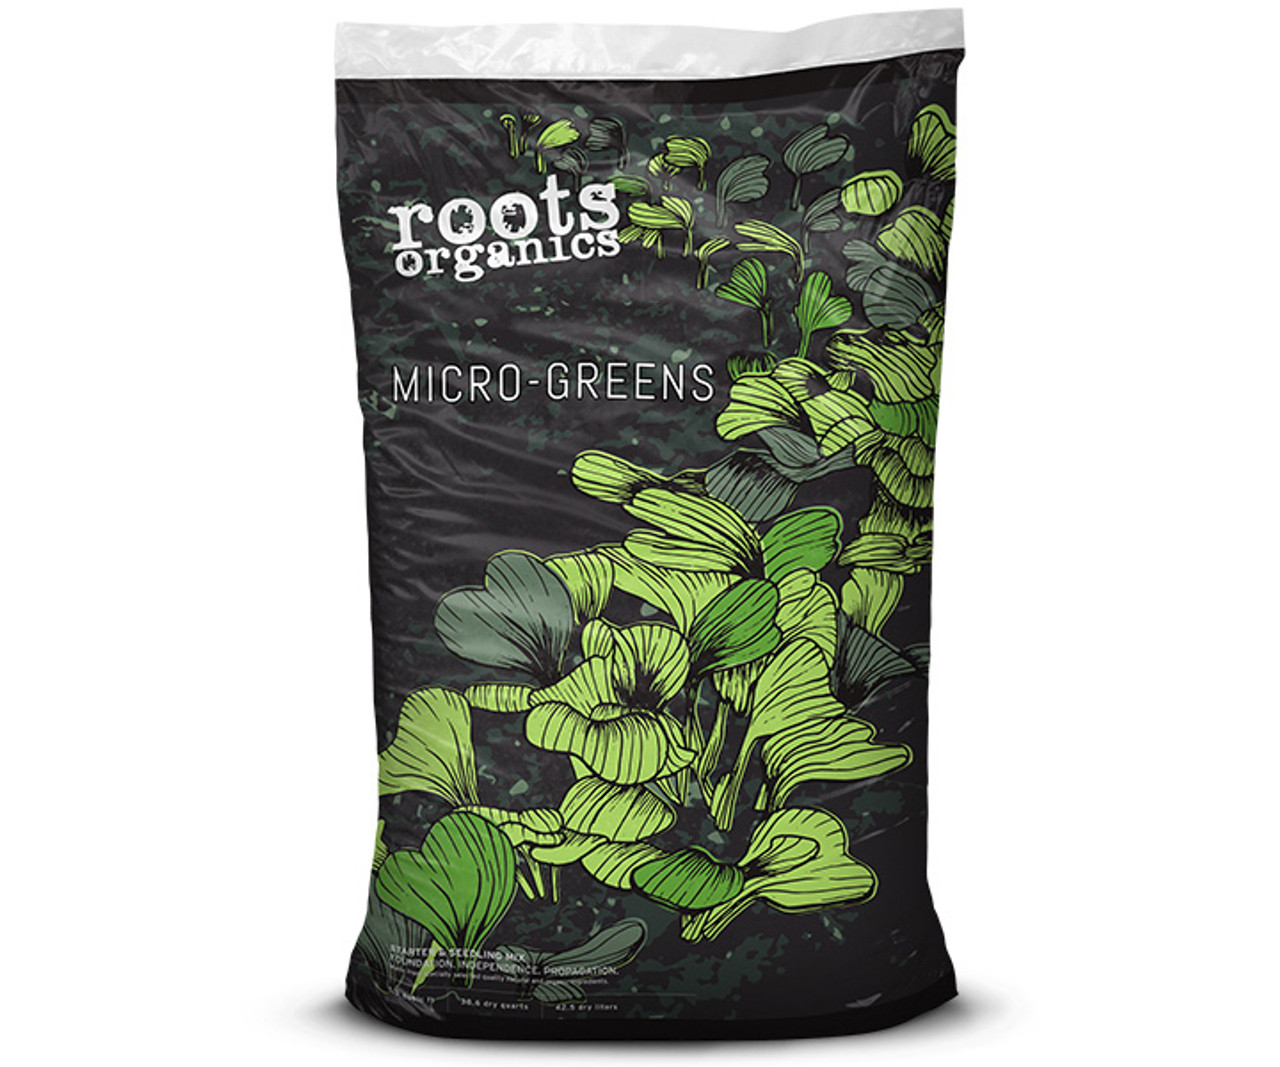 Roots Organics Micro-Greens soil 1.5 cf  *pick-up in store only